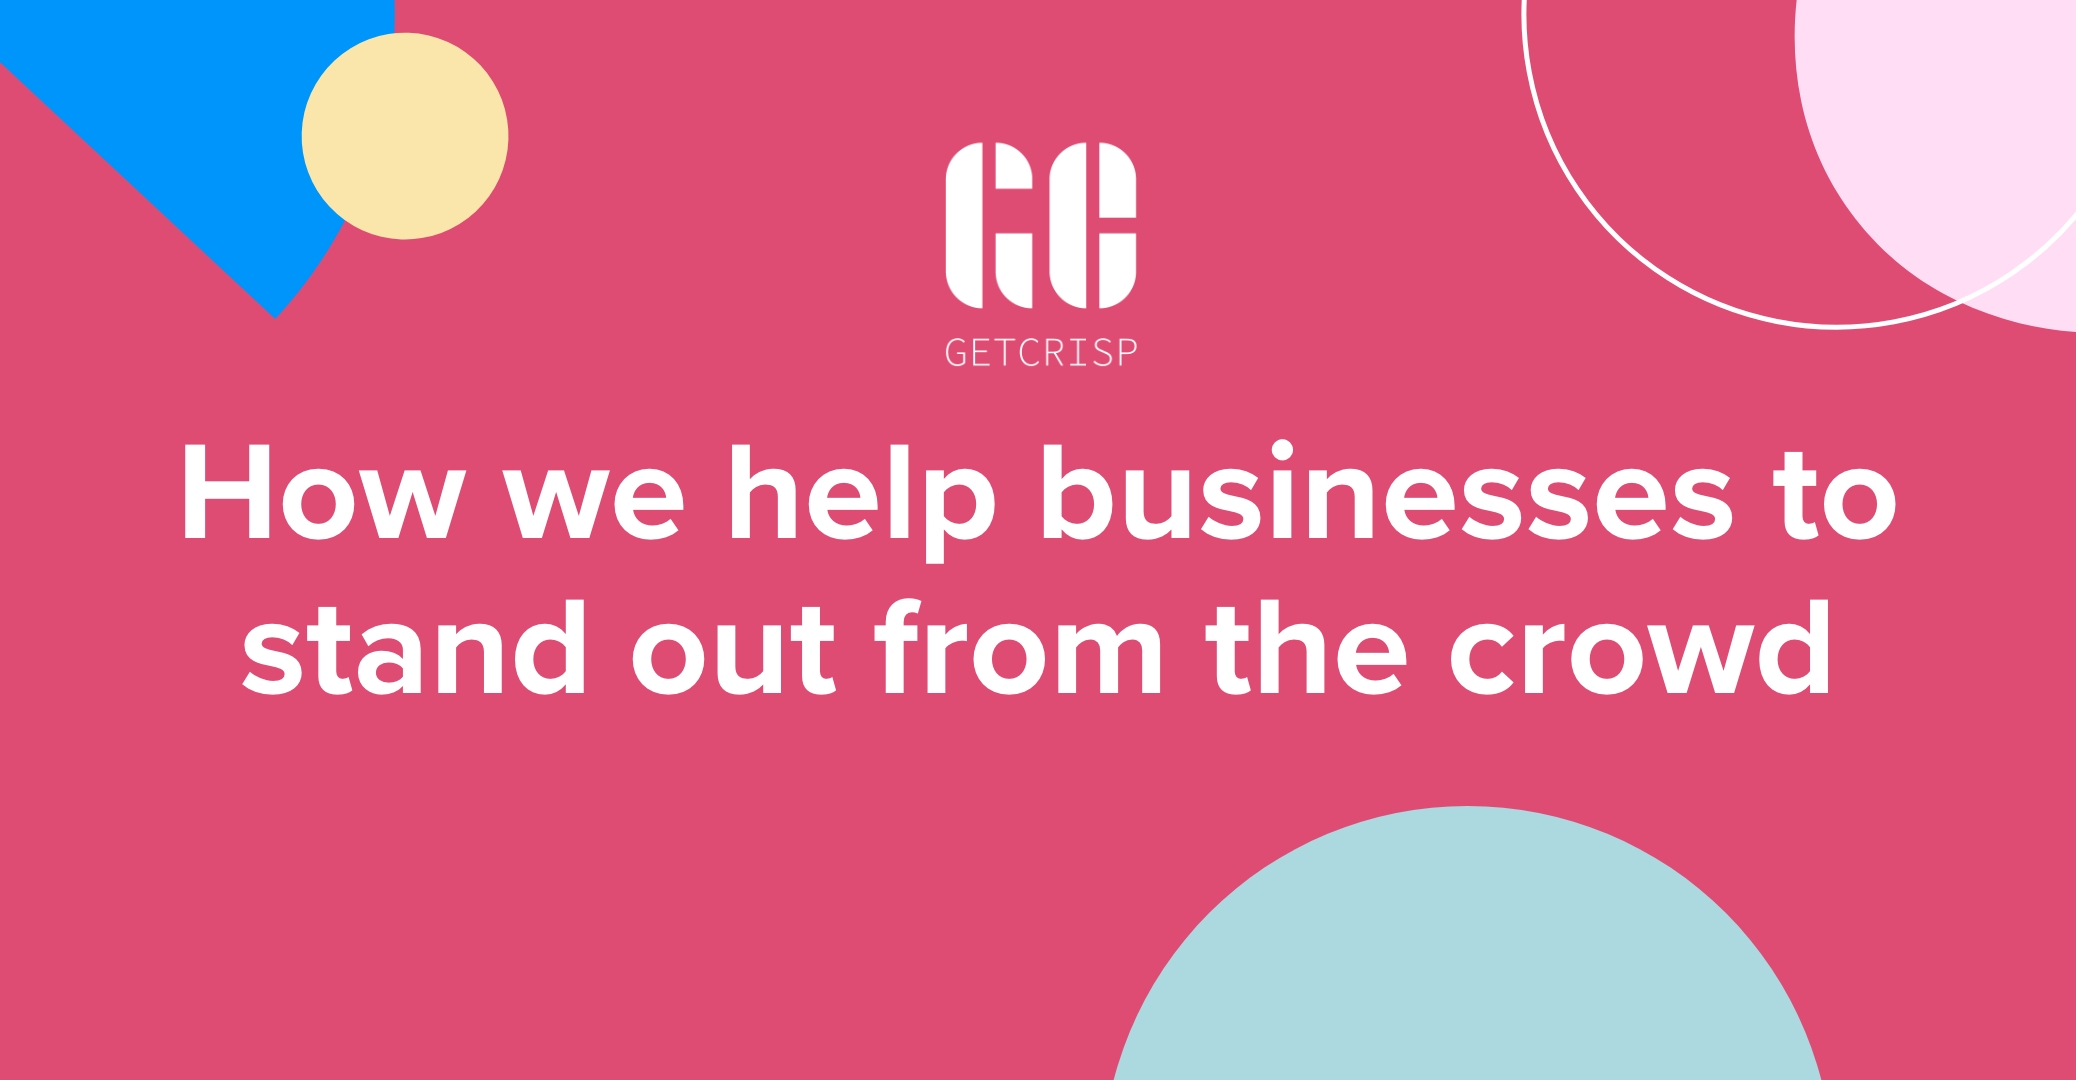 GetCrisp: How we help businesses to stand out from the crowd